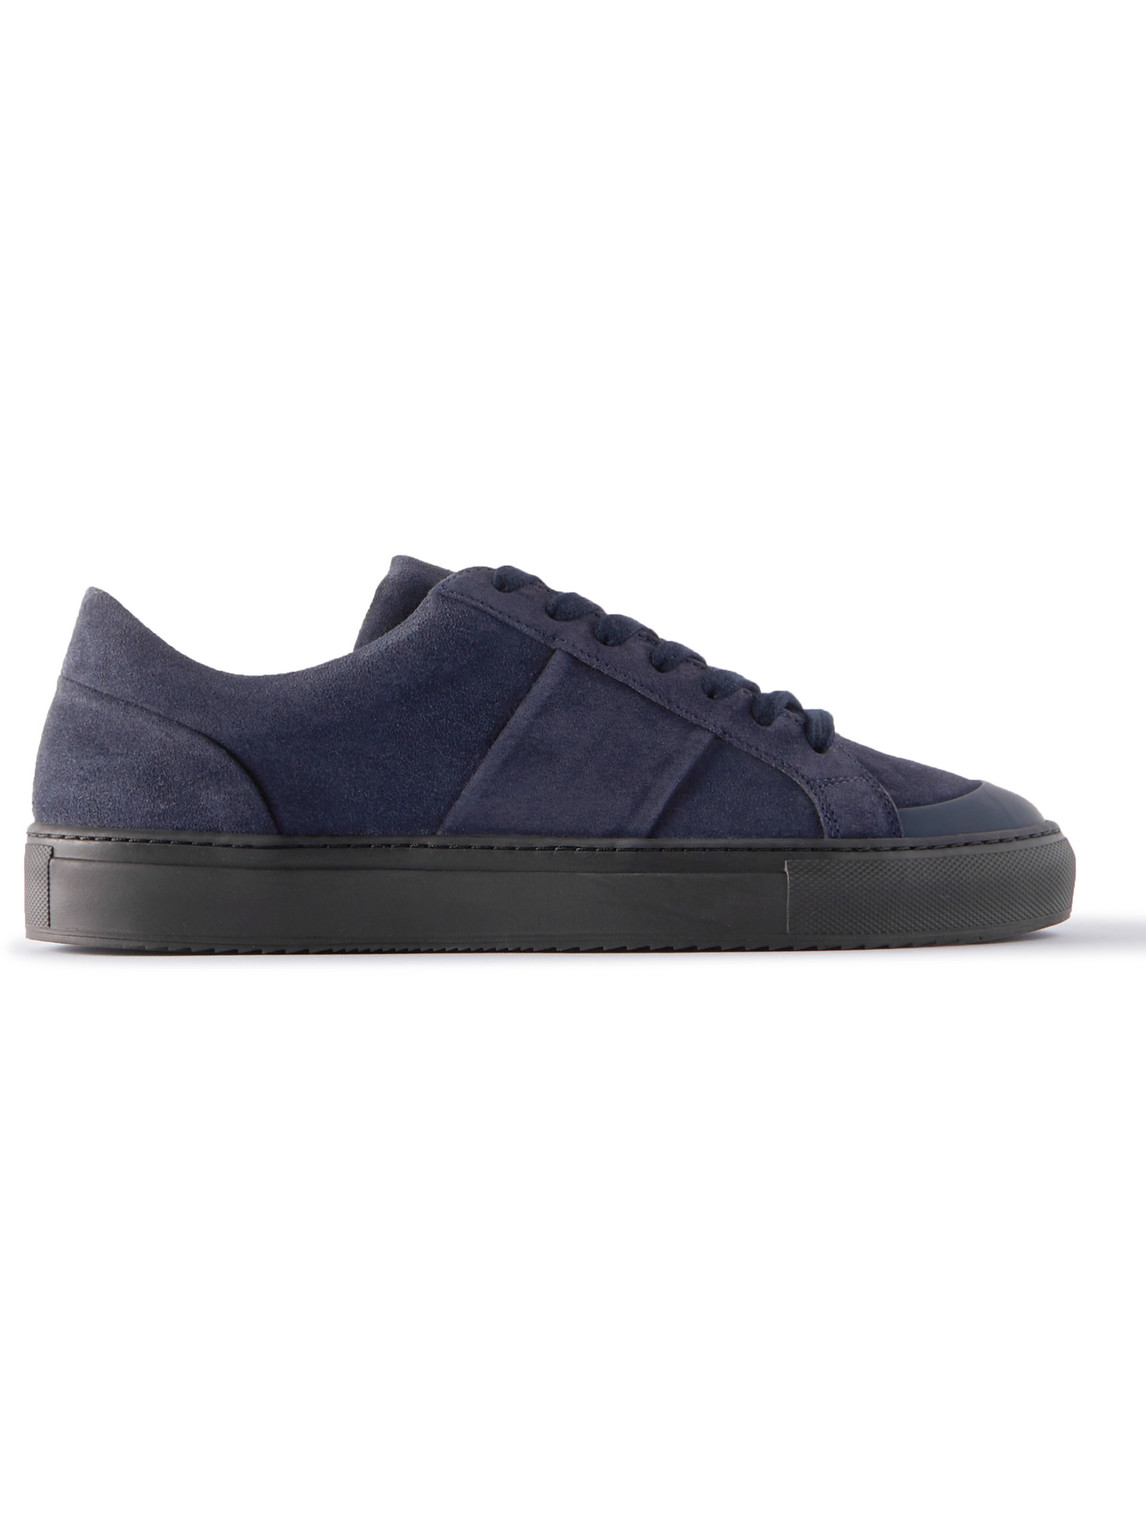 Mr P. Larry Regenerated Suede By Evolo® Sneakers In Blue